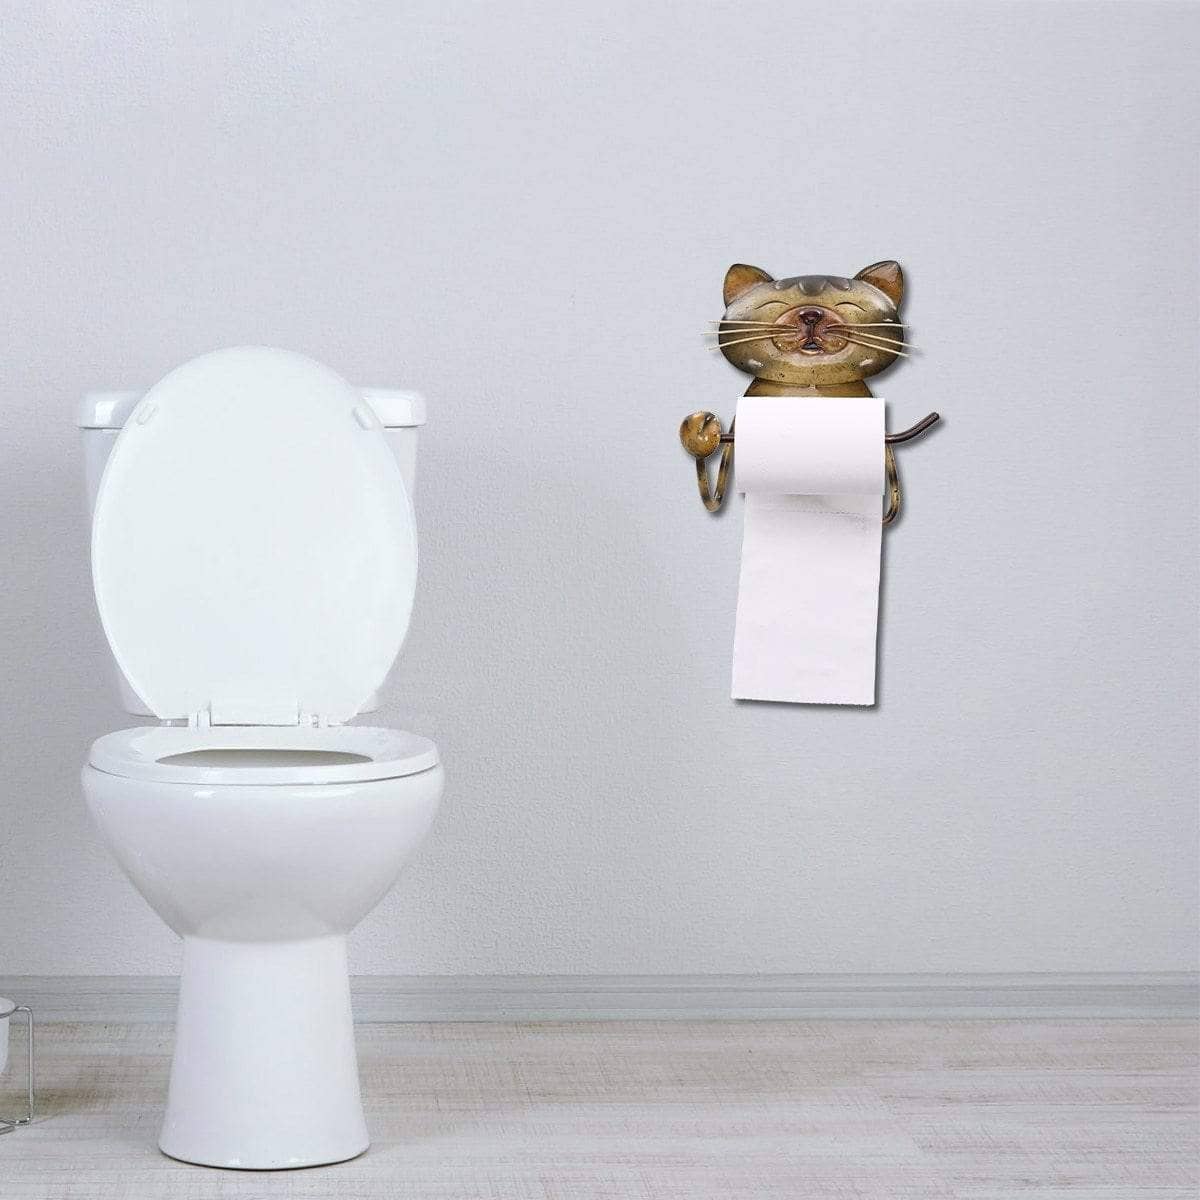 Cat Paper Roll Towel Holder - Playful Bathroom Accessory